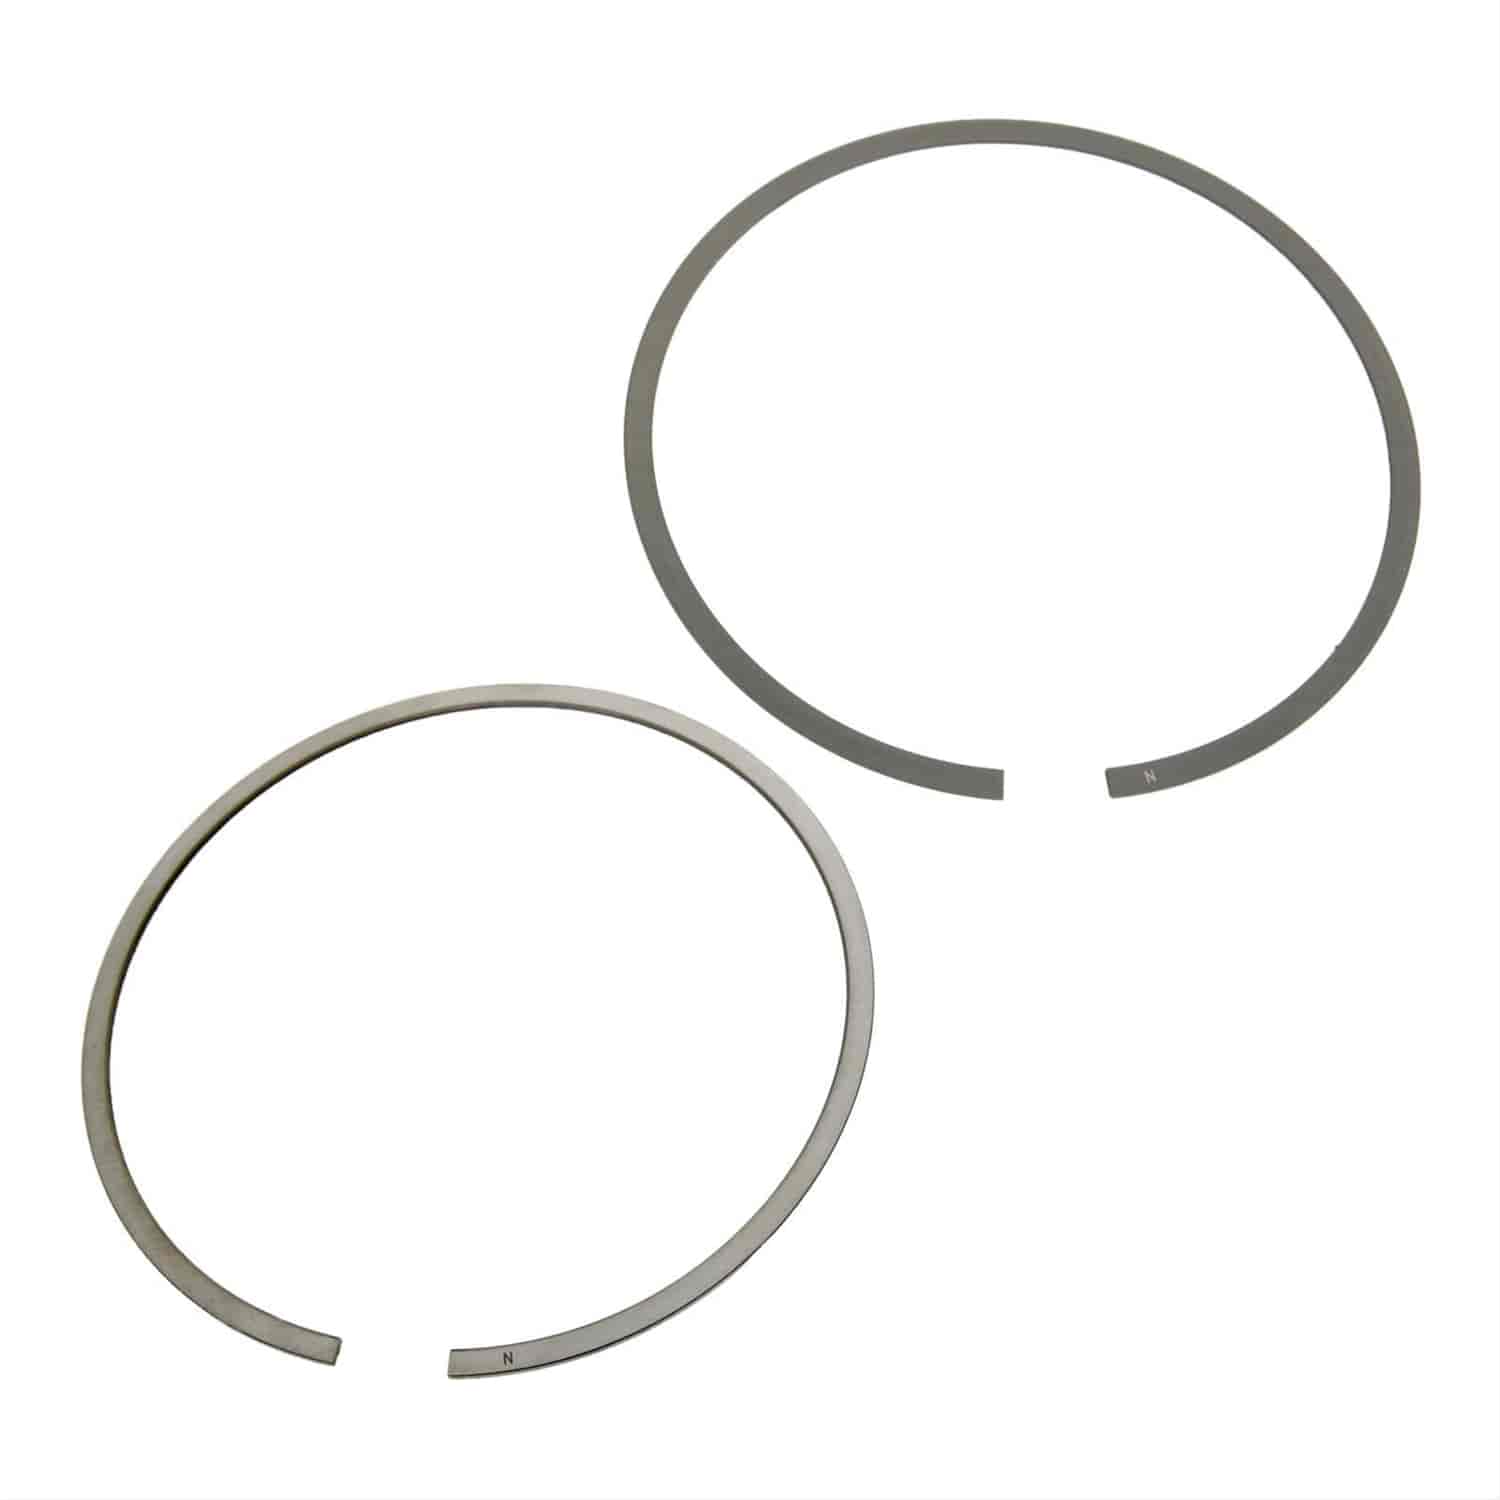 103.683mm 4.082IN. Auto RING SET- 1 cyl.